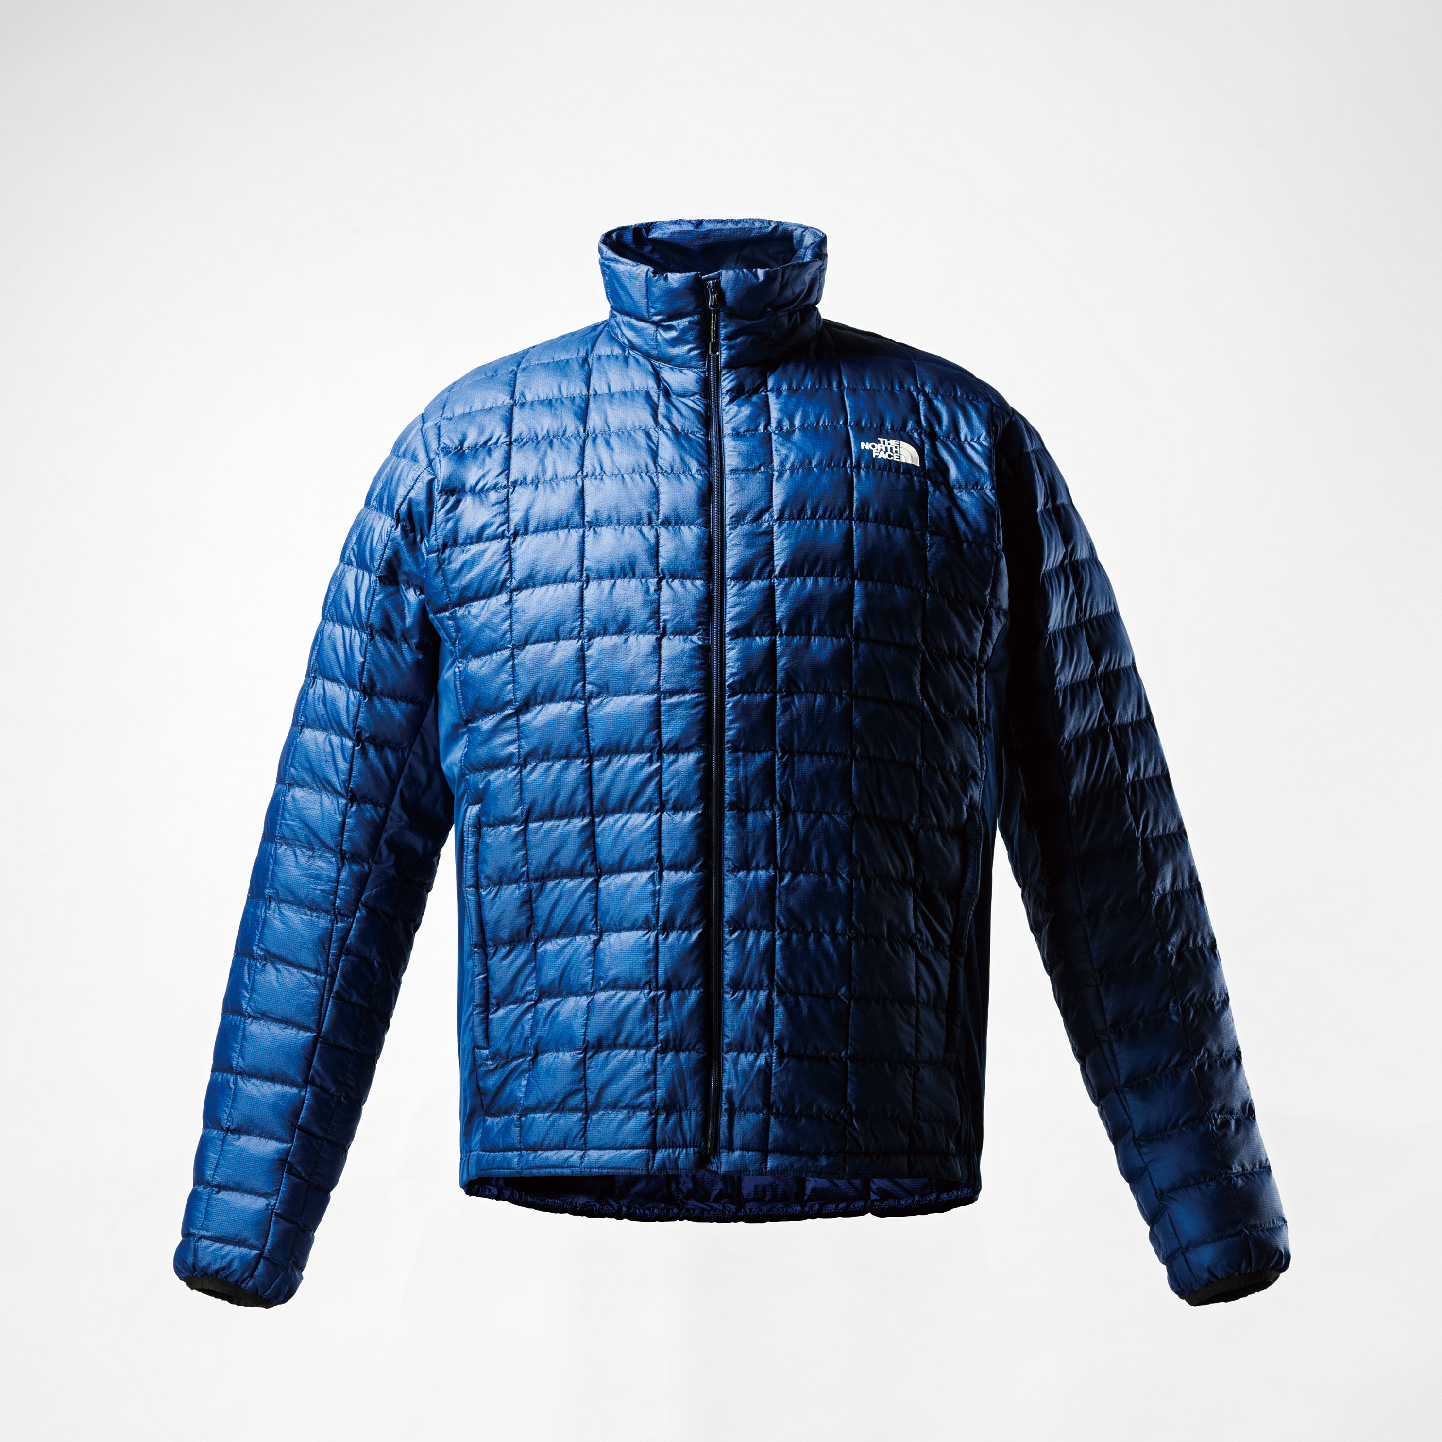 THERMOBALL | THE NORTH FACE